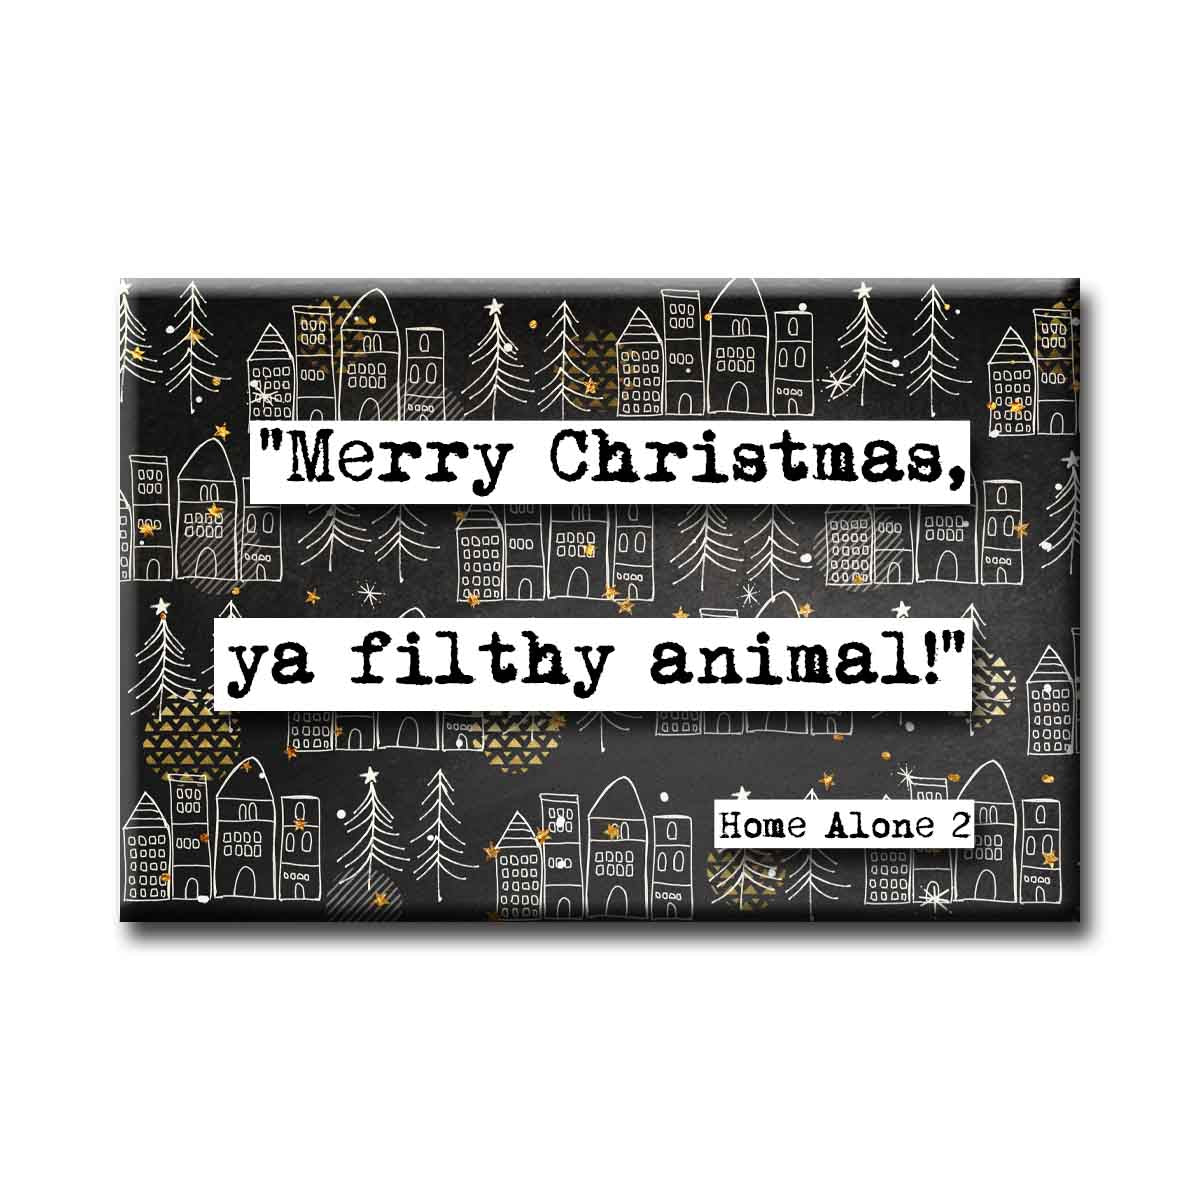 Home Alone 2 Merry Christmas Quote Magnet (no.43c)